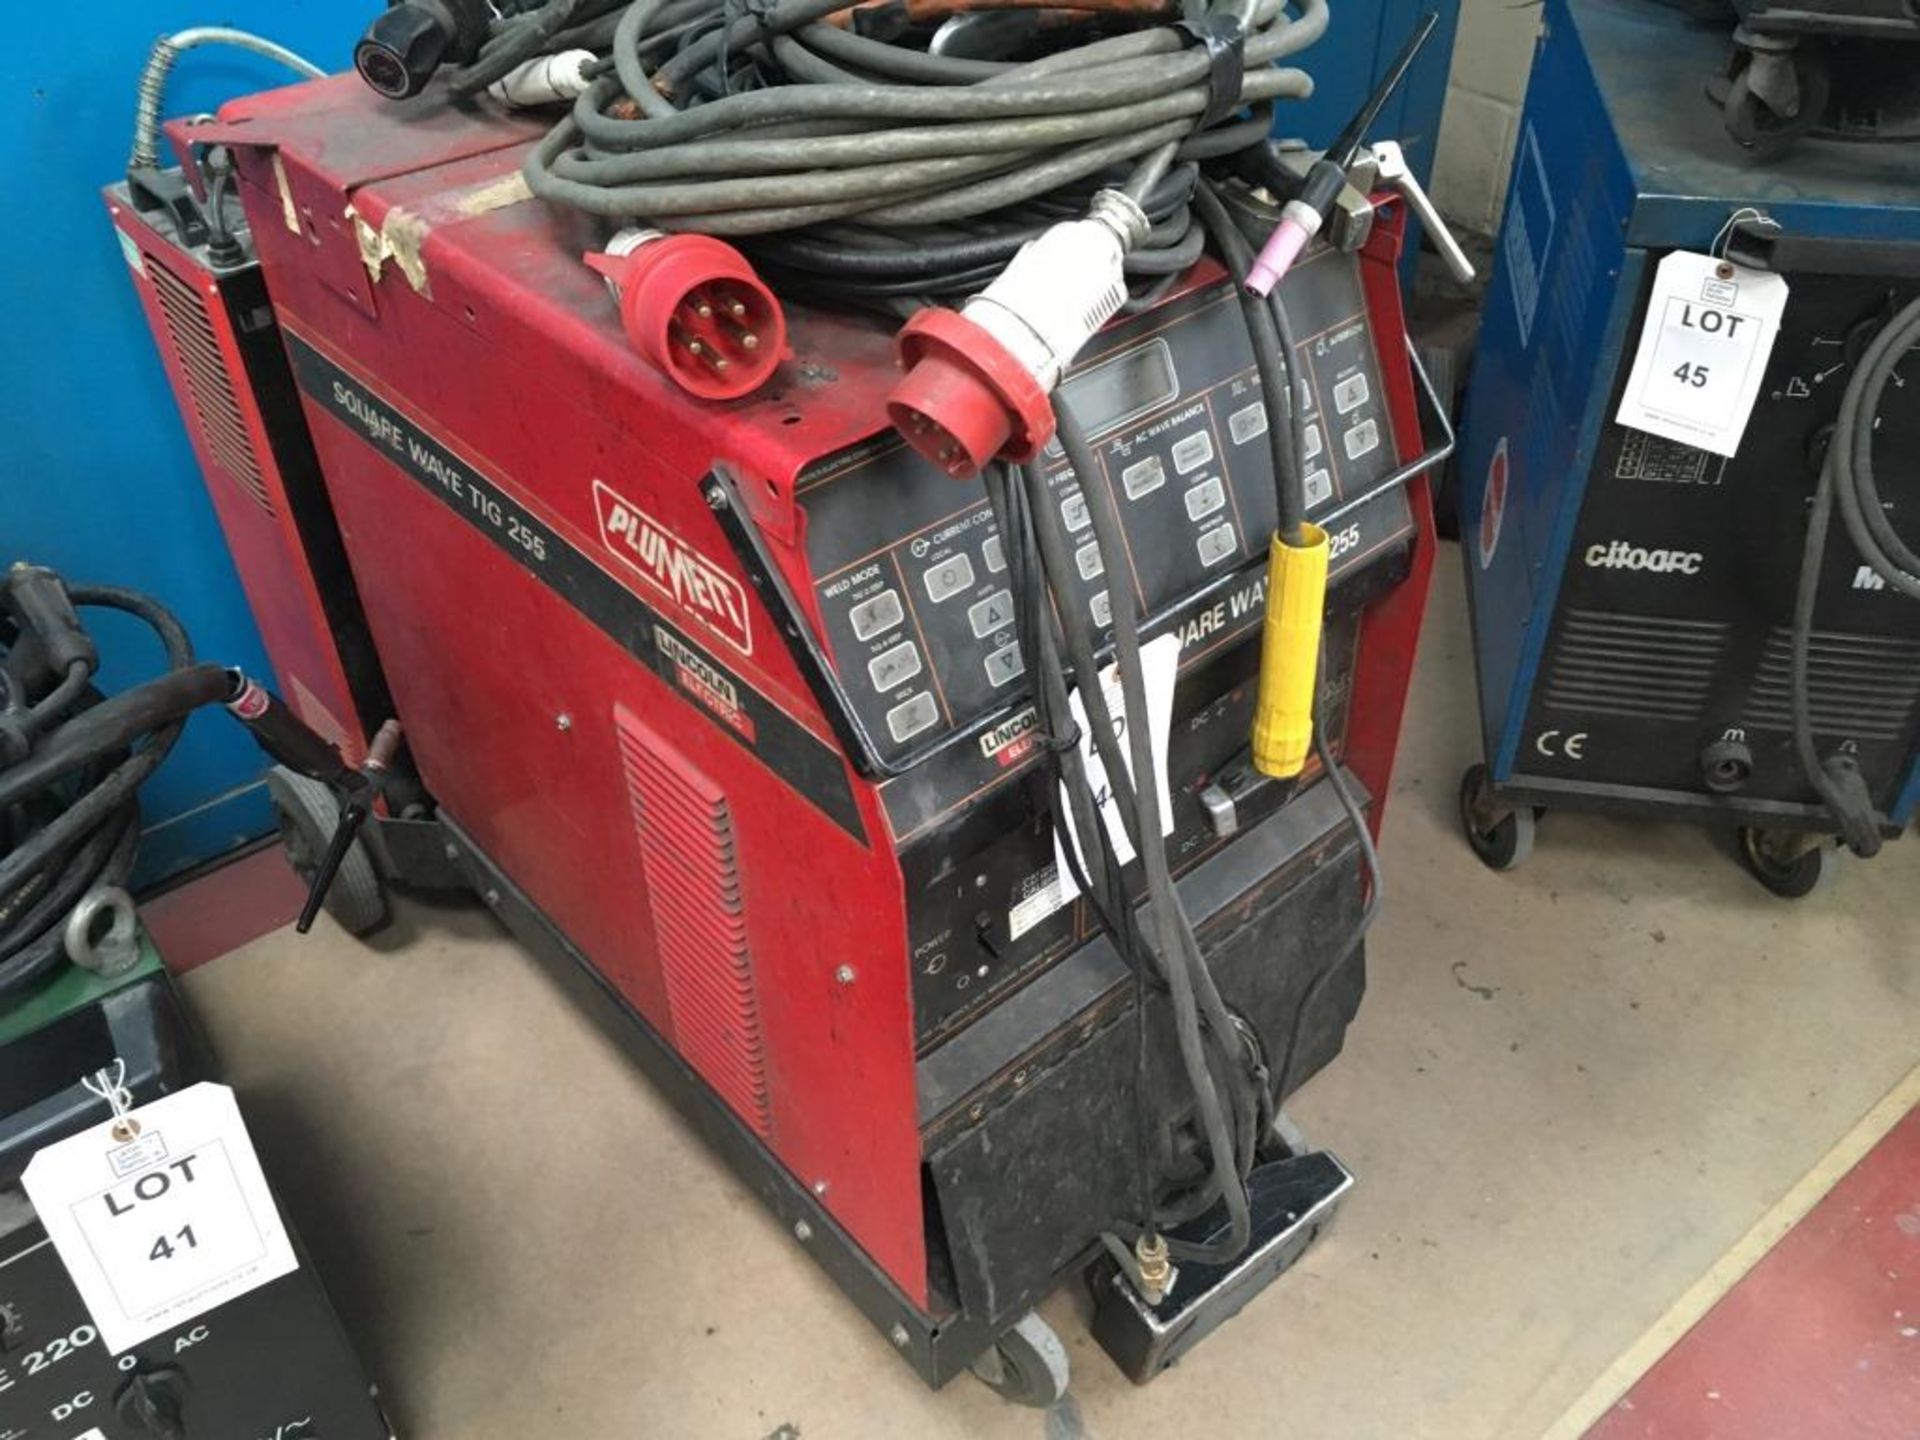 Lincoln Electric Square Wave Tig 255 welder with Telwin GRA 90 water cooler